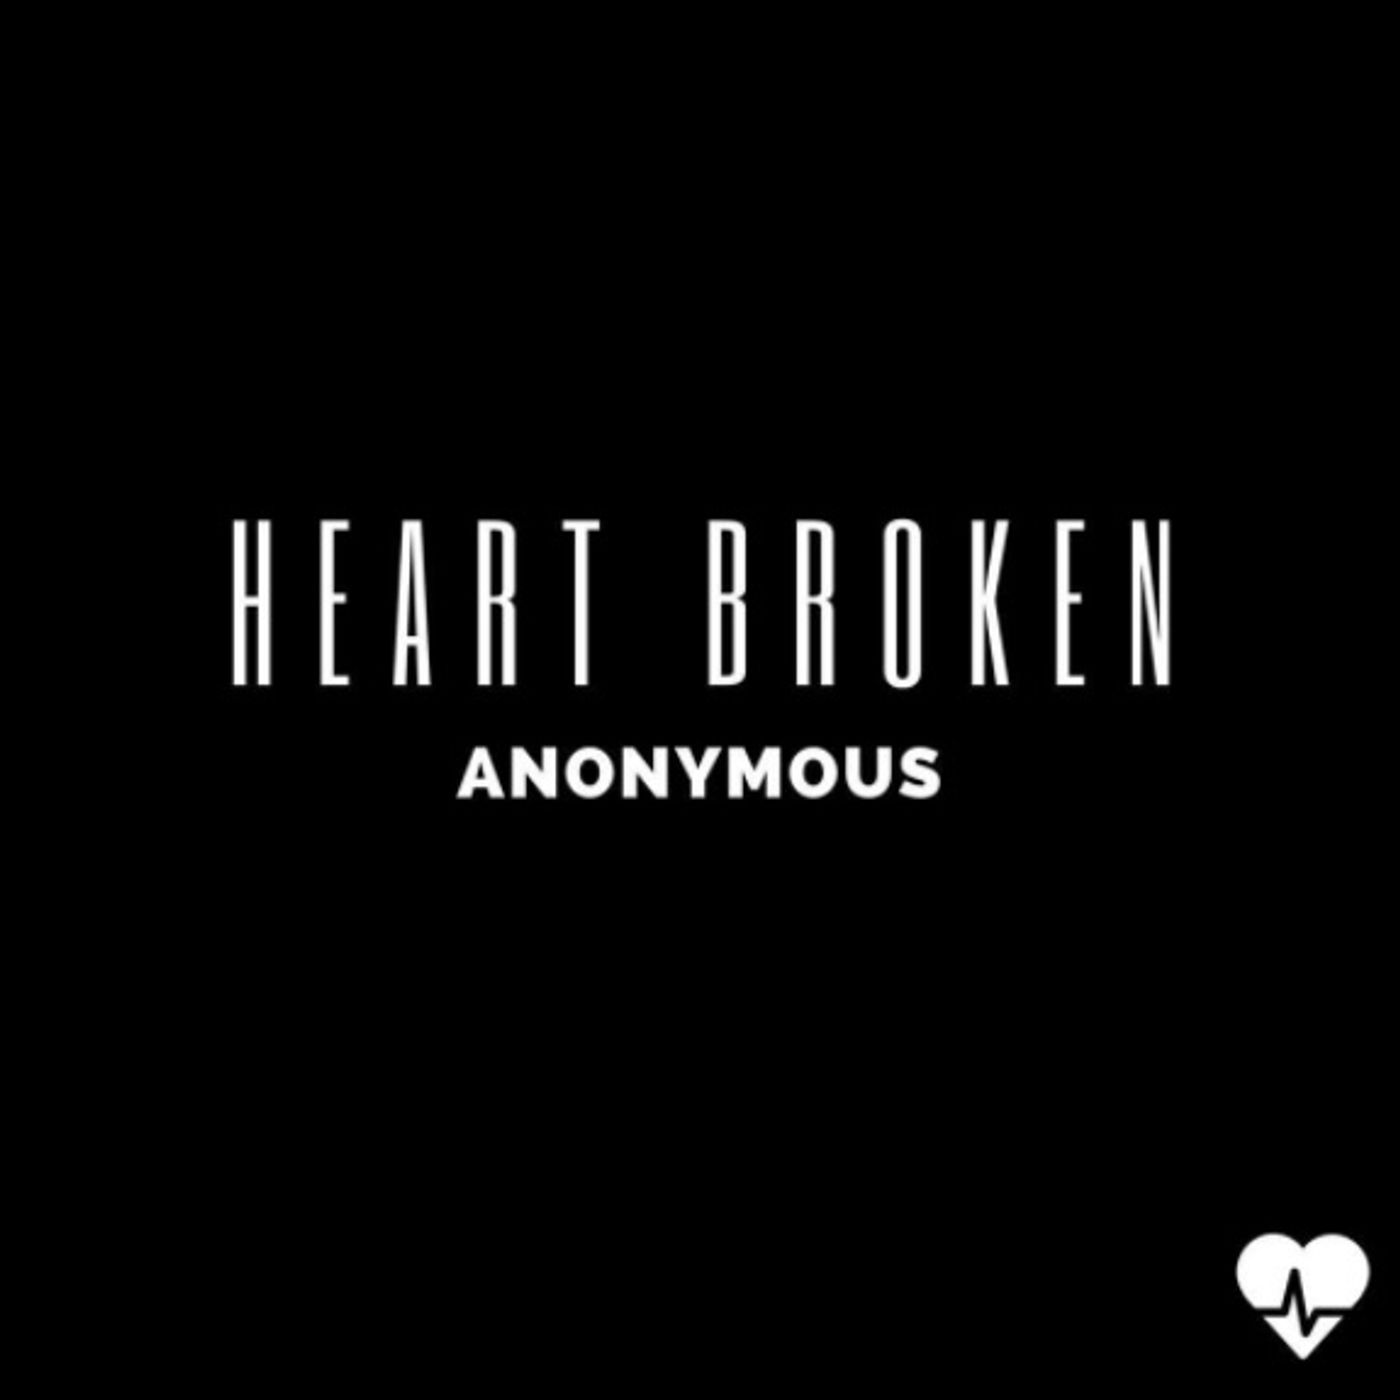 Founder Of Heart Broken Anonymous Tells Ellen K What It's All About